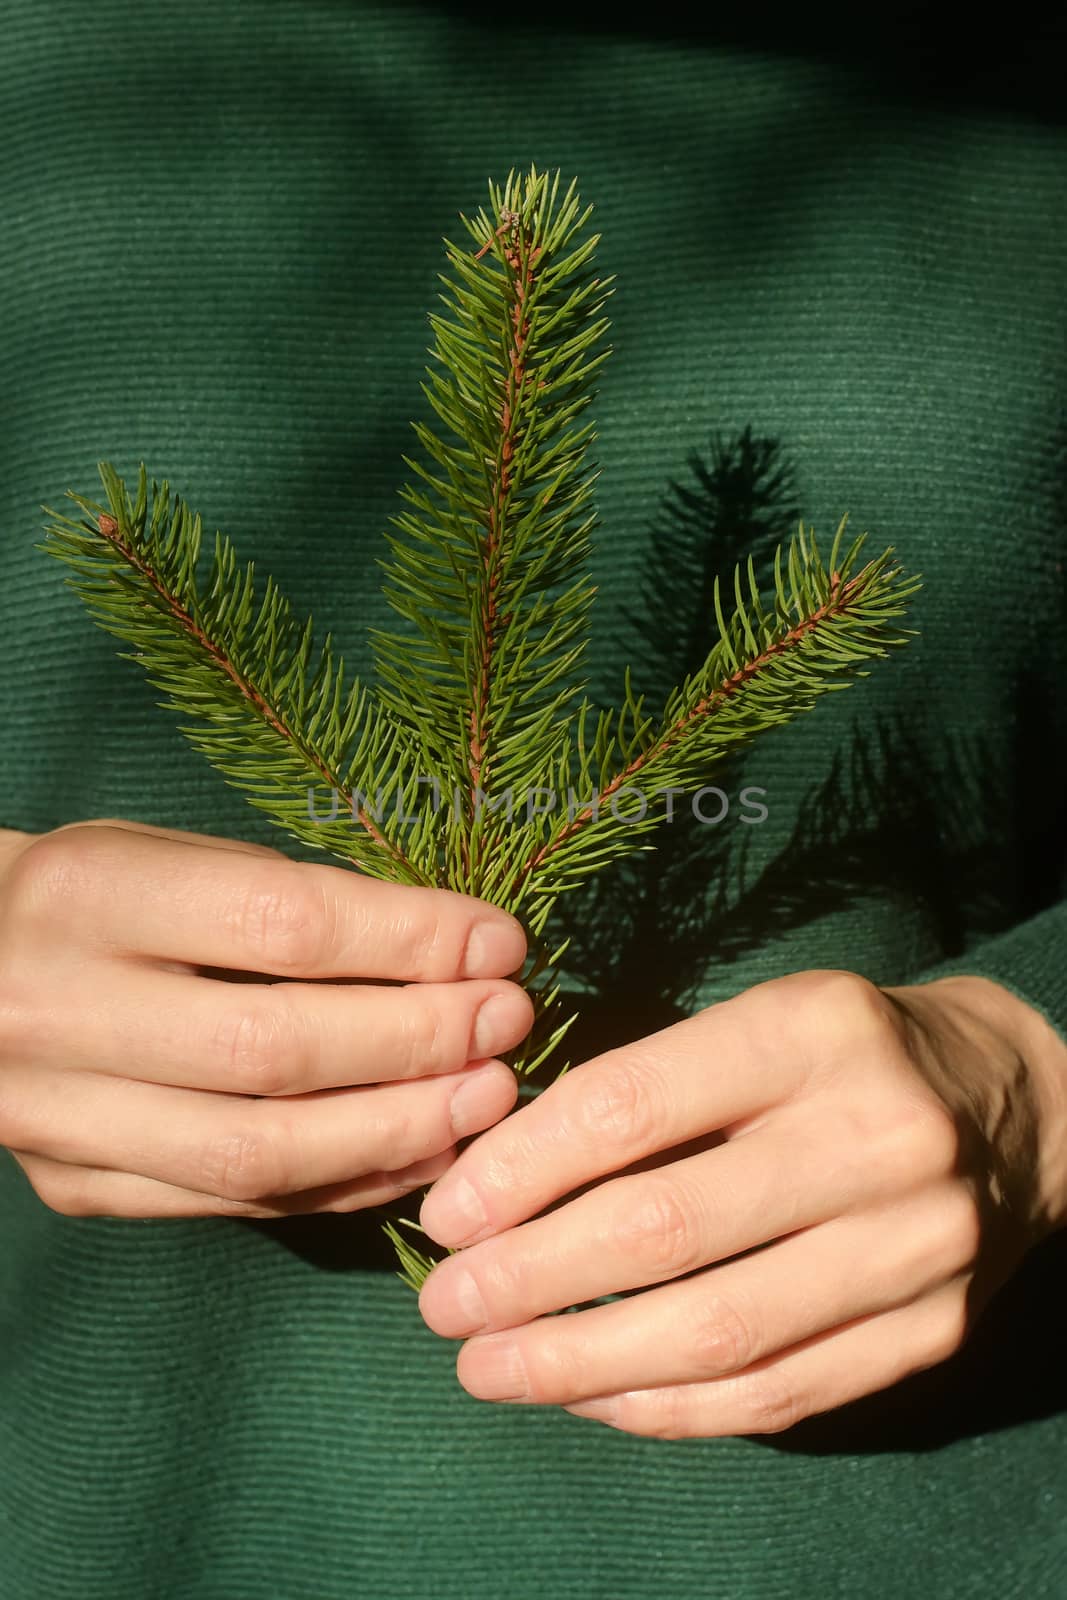 Woman is holding pine tree branch and natural sunlight